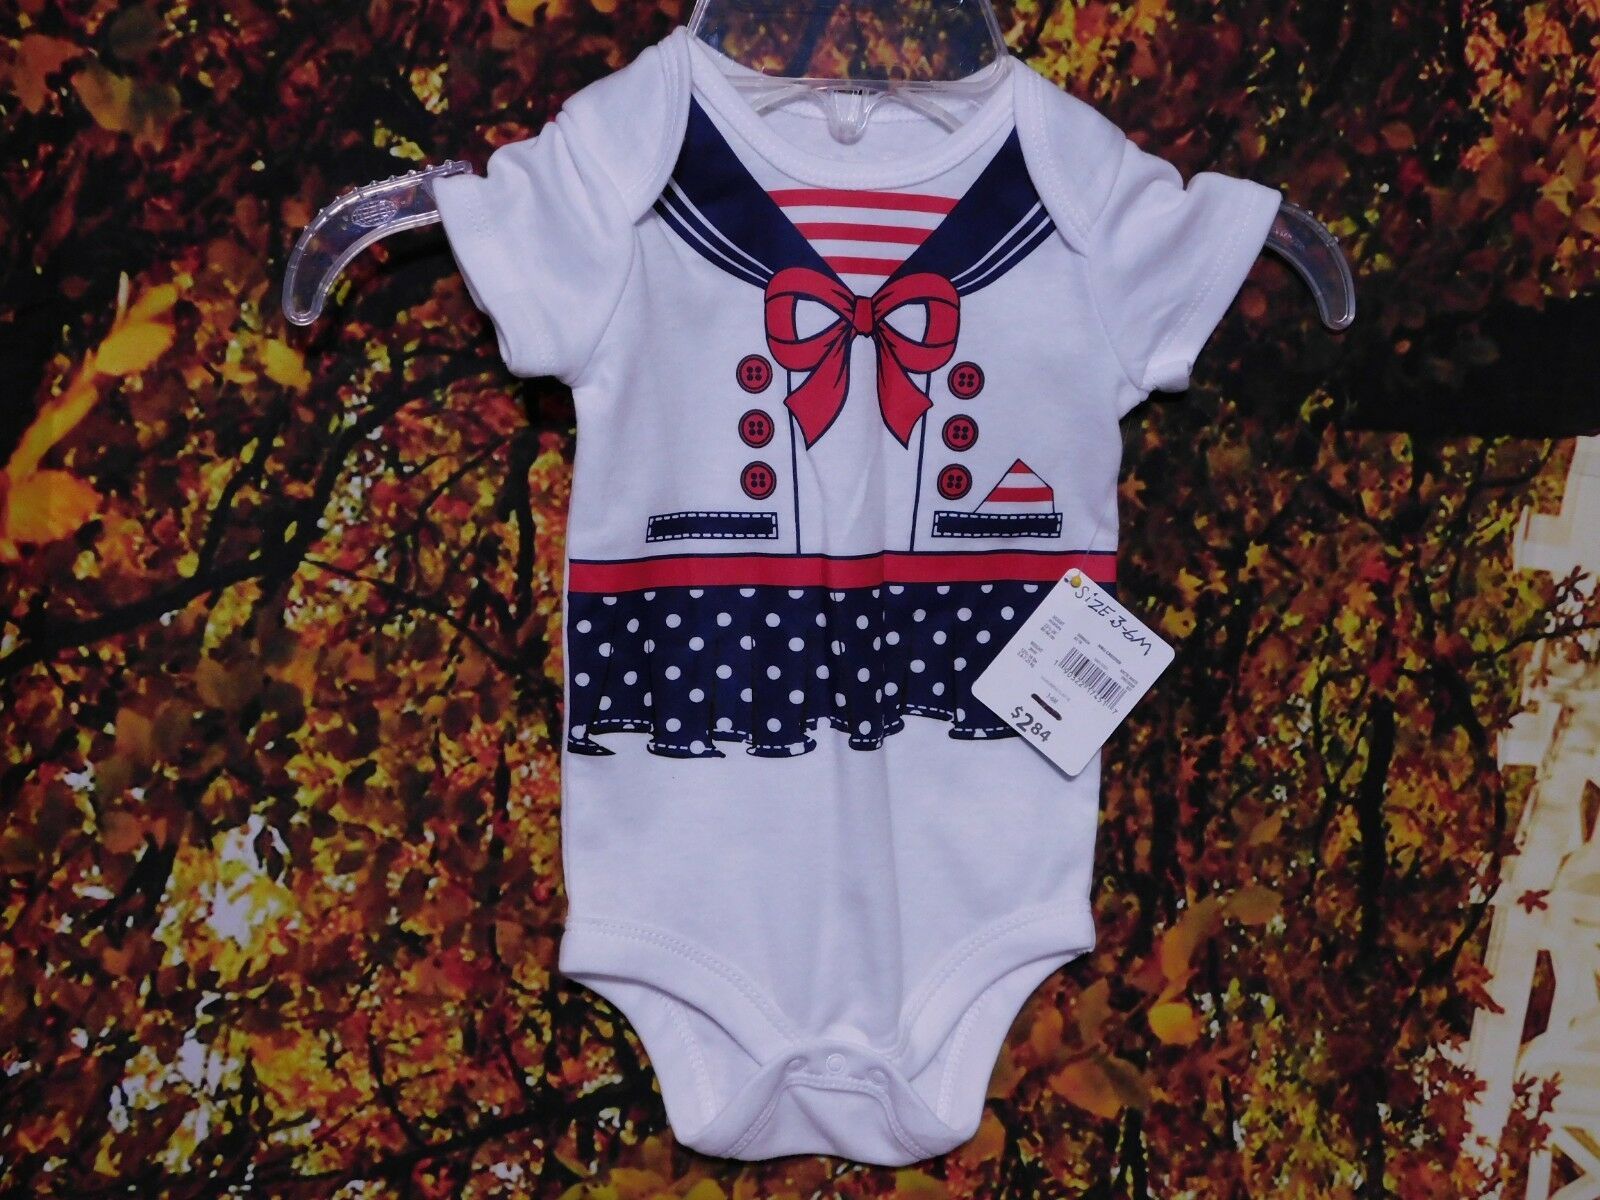 BABY GIRL'S ALL IN ONE PIECE BY STAR / SIZE 24 MONTHS - $6.85